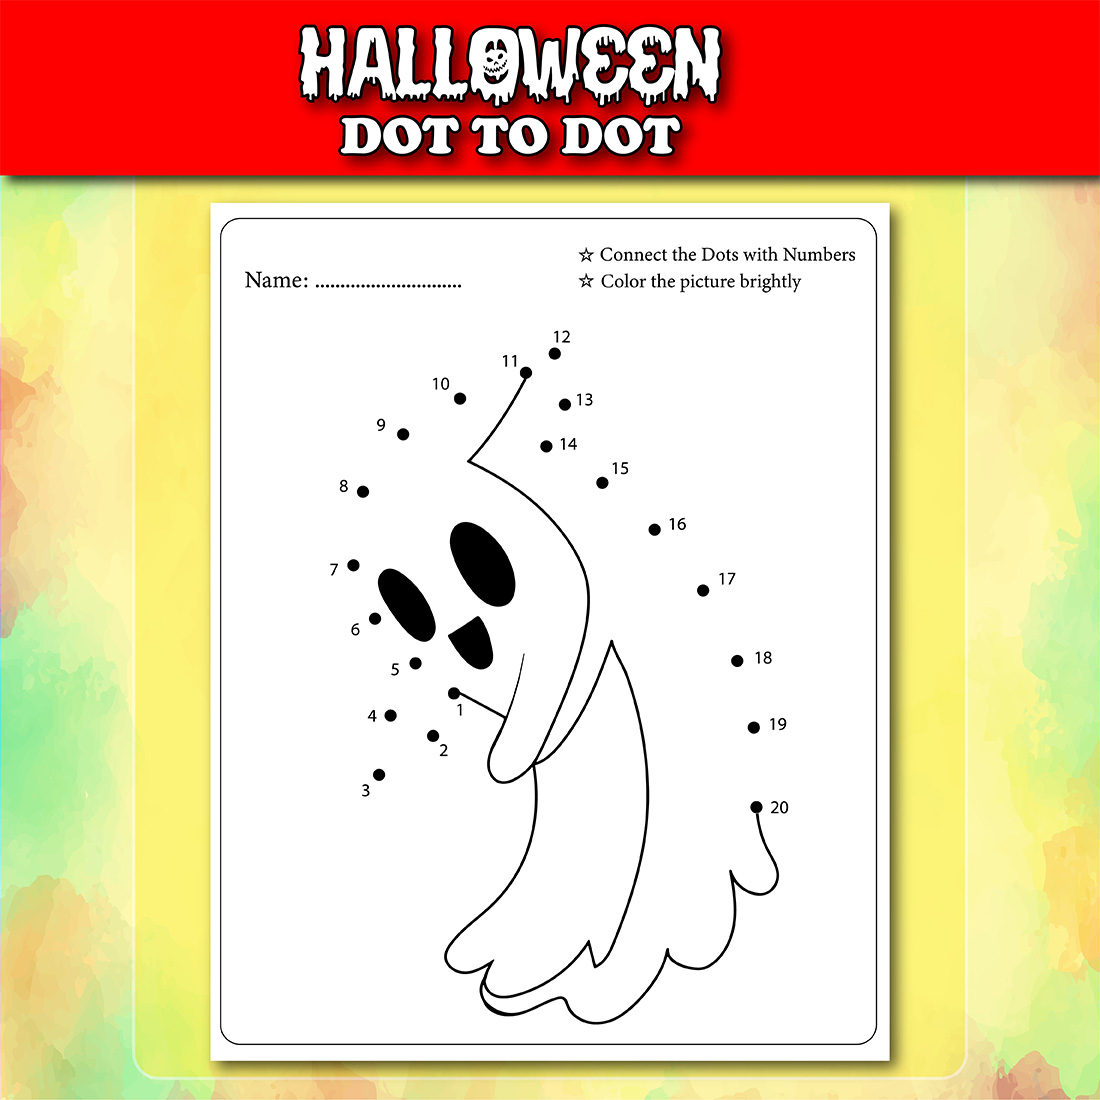 Halloween Dot To Dot For Kids Vol - 3, ghost page.